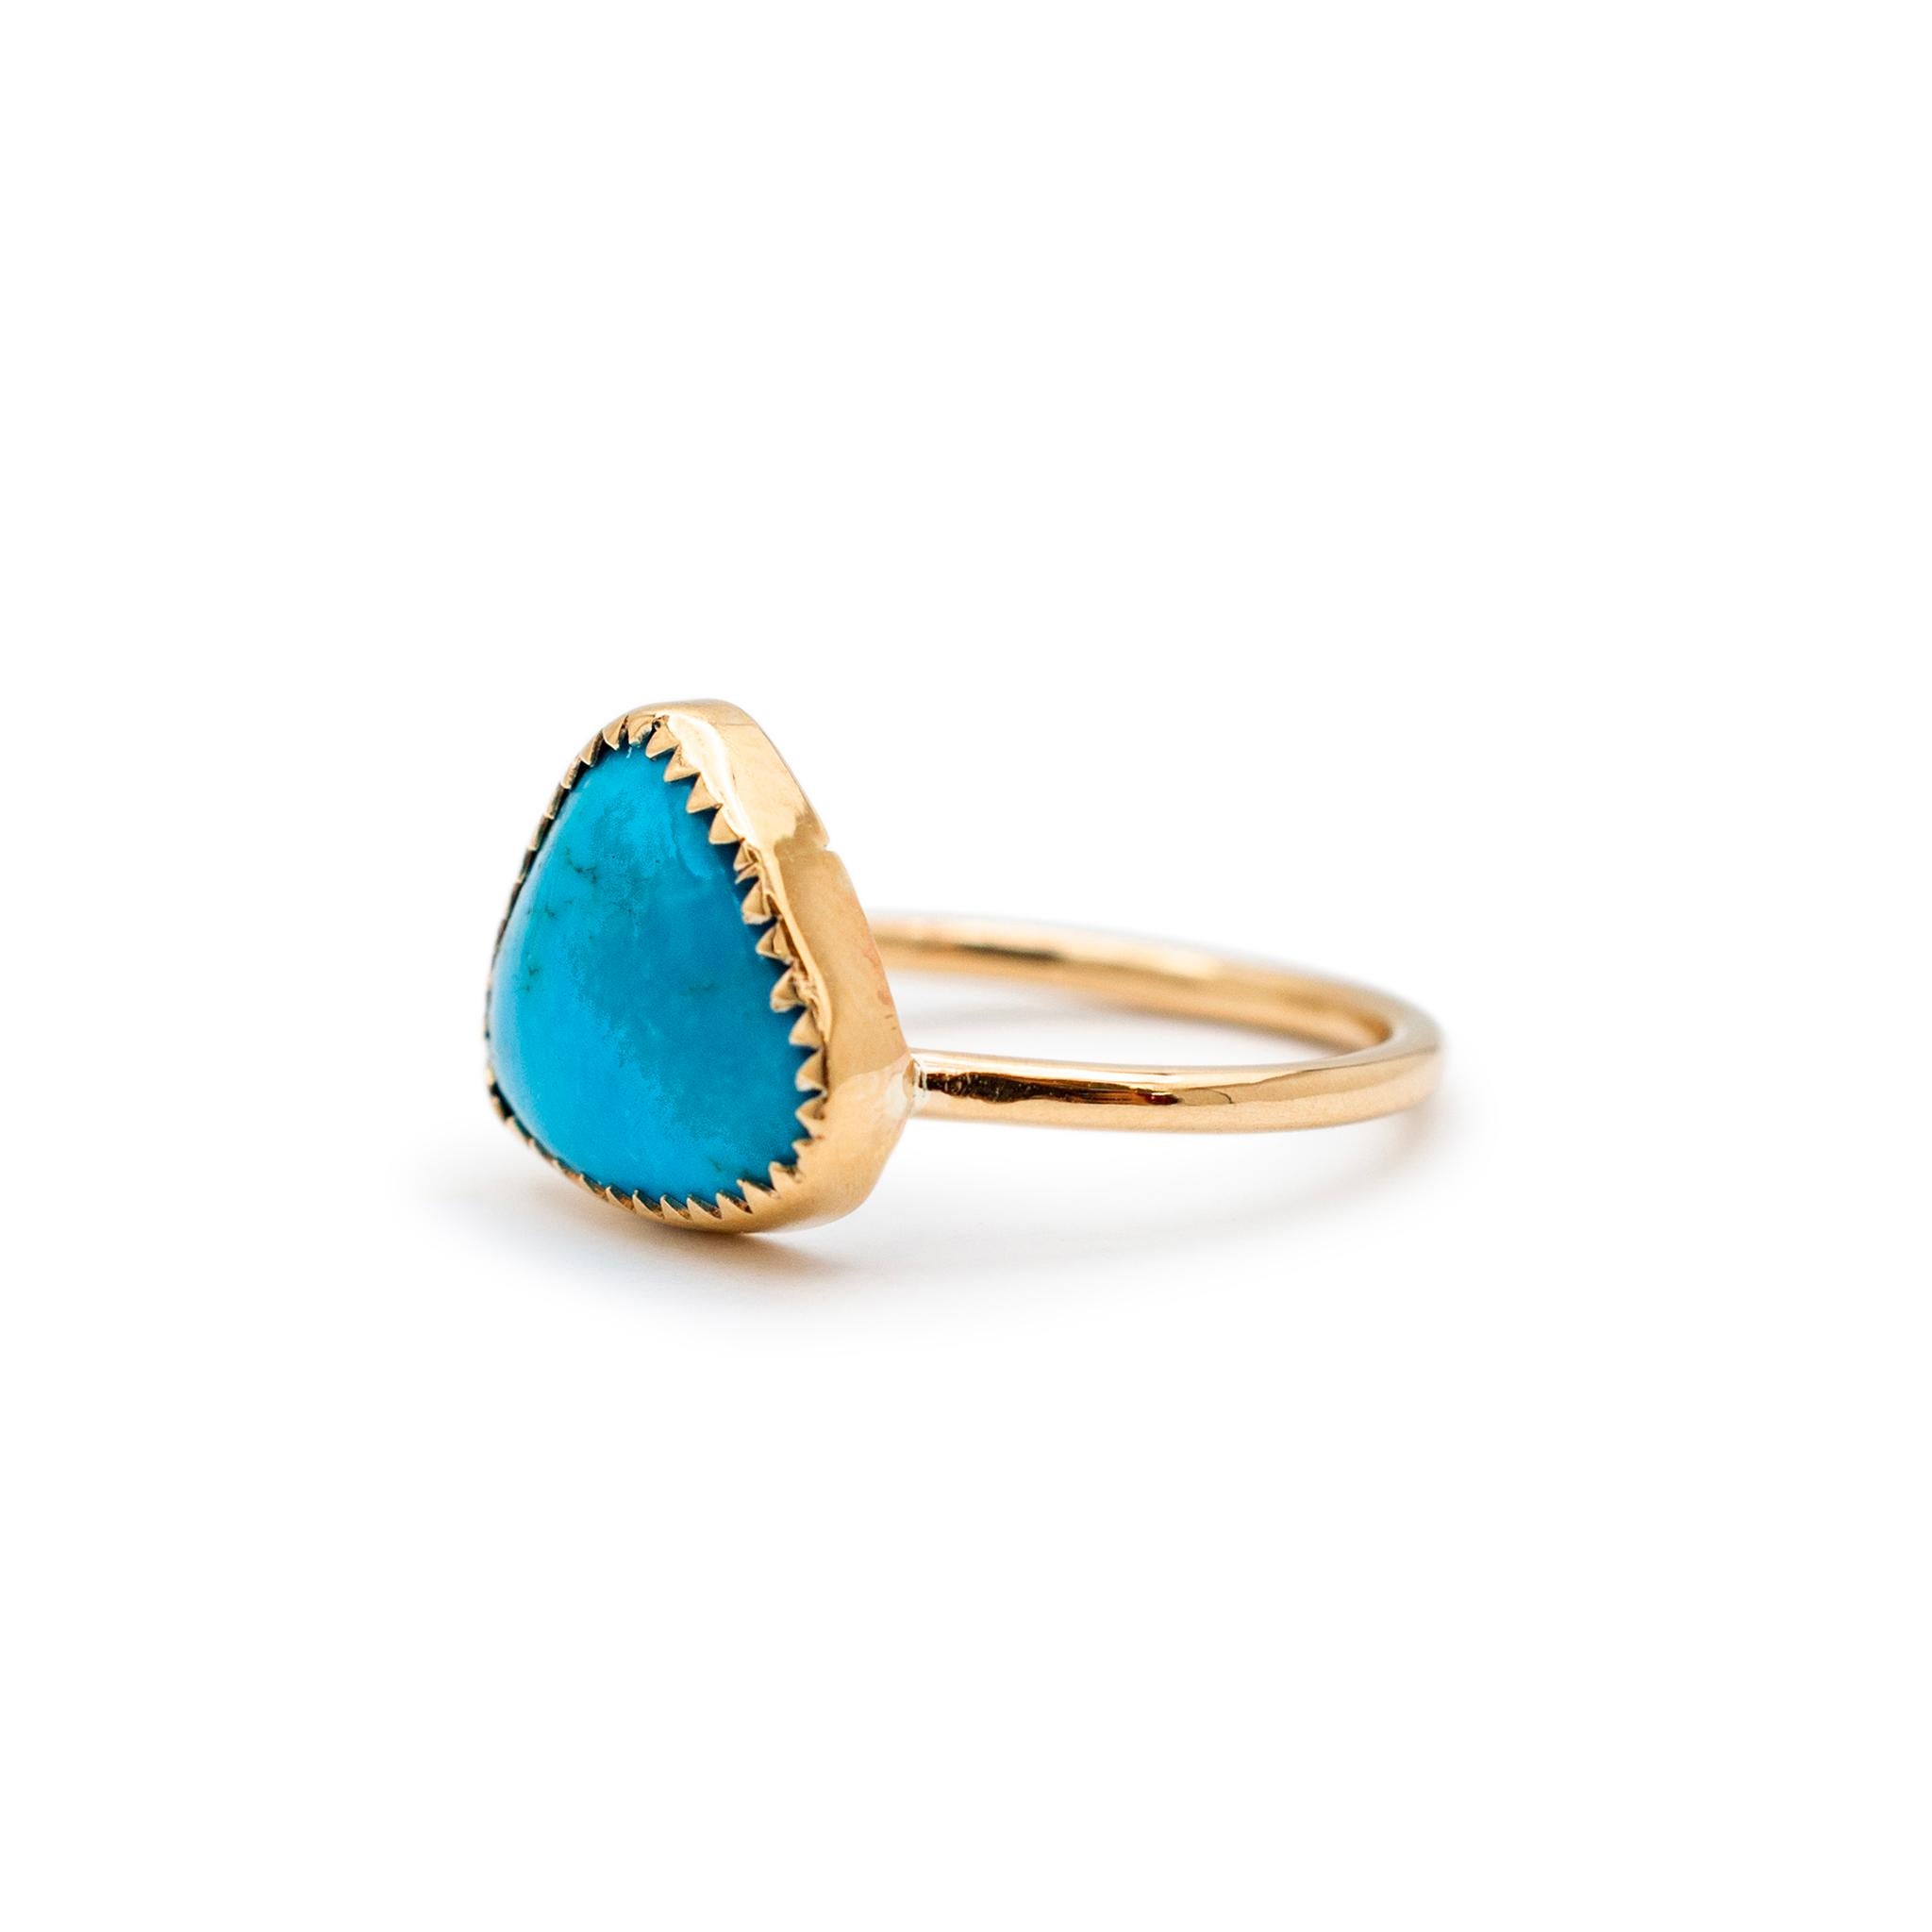 Ladies 14K Rose Gold Triangular Turquoise Cocktail Ring In Excellent Condition For Sale In Houston, TX